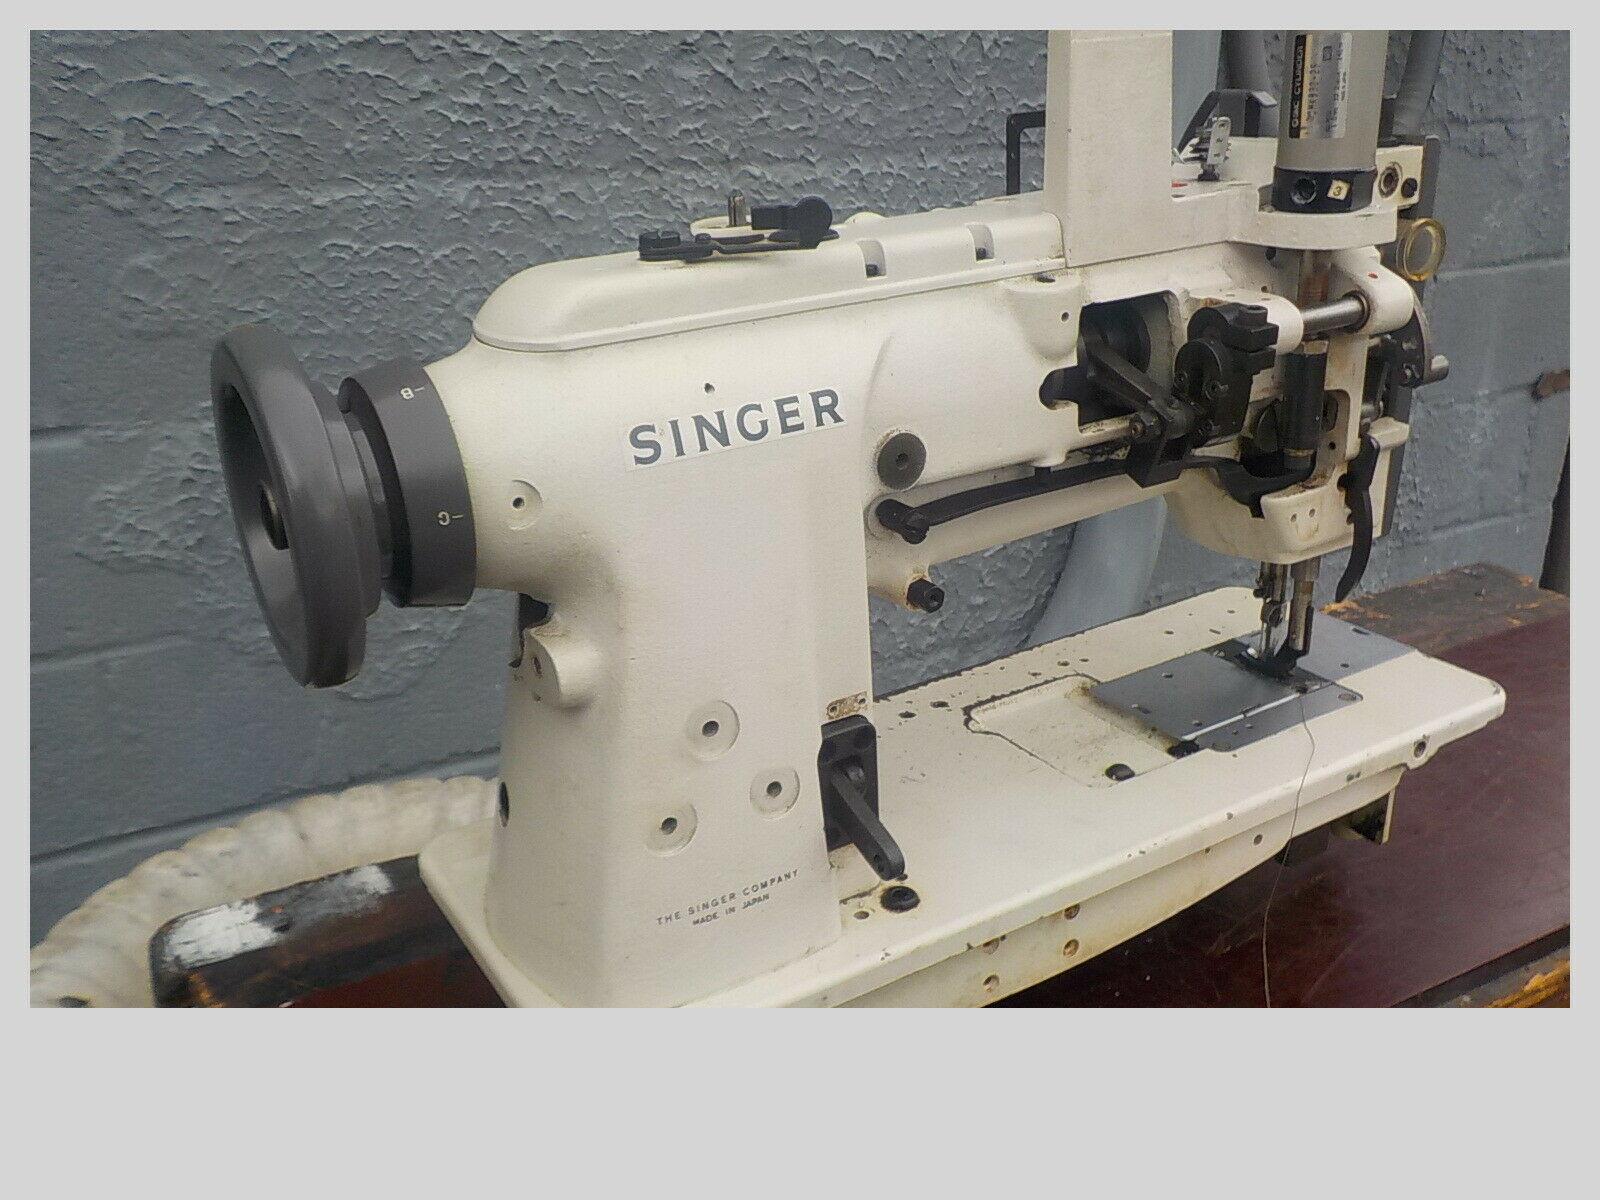 Singer 211 G151 Singer walking foot industrial sewing machine. Works very  good on both leather - Sewing Machines & Sergers - Ballwin, Missouri, Facebook Marketplace